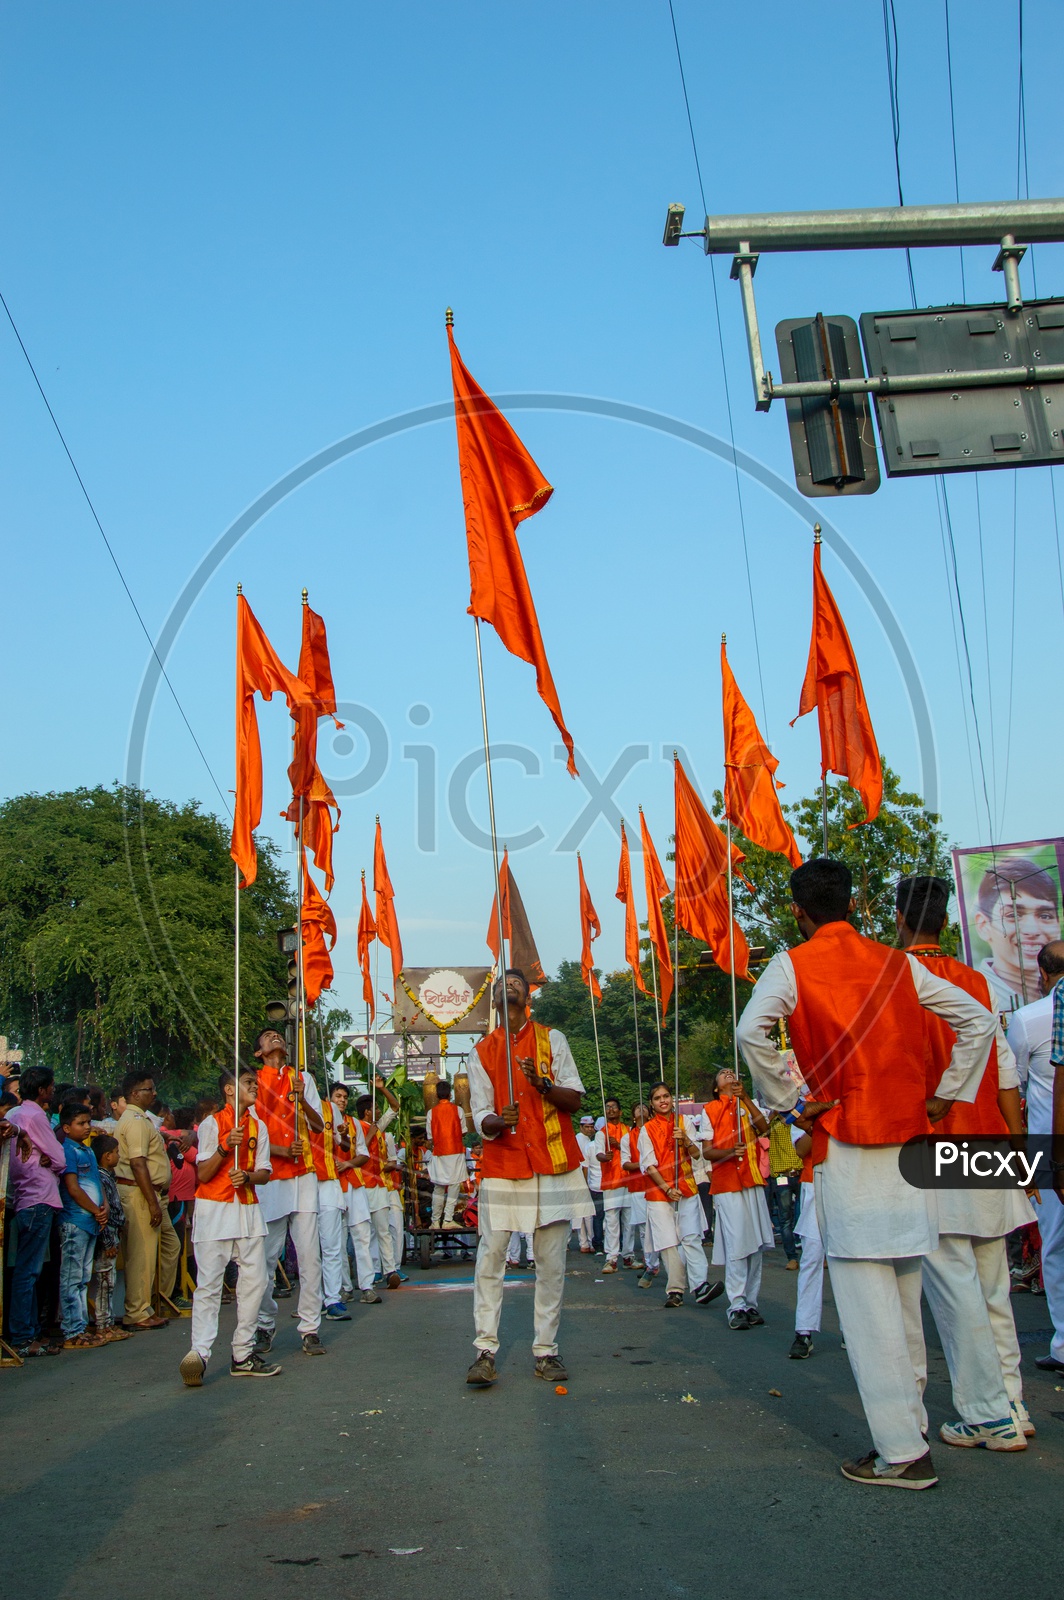 A Group of Man Performing And Dancing On the Streets Holding Saffron Flags During Lord Hanuman Procession